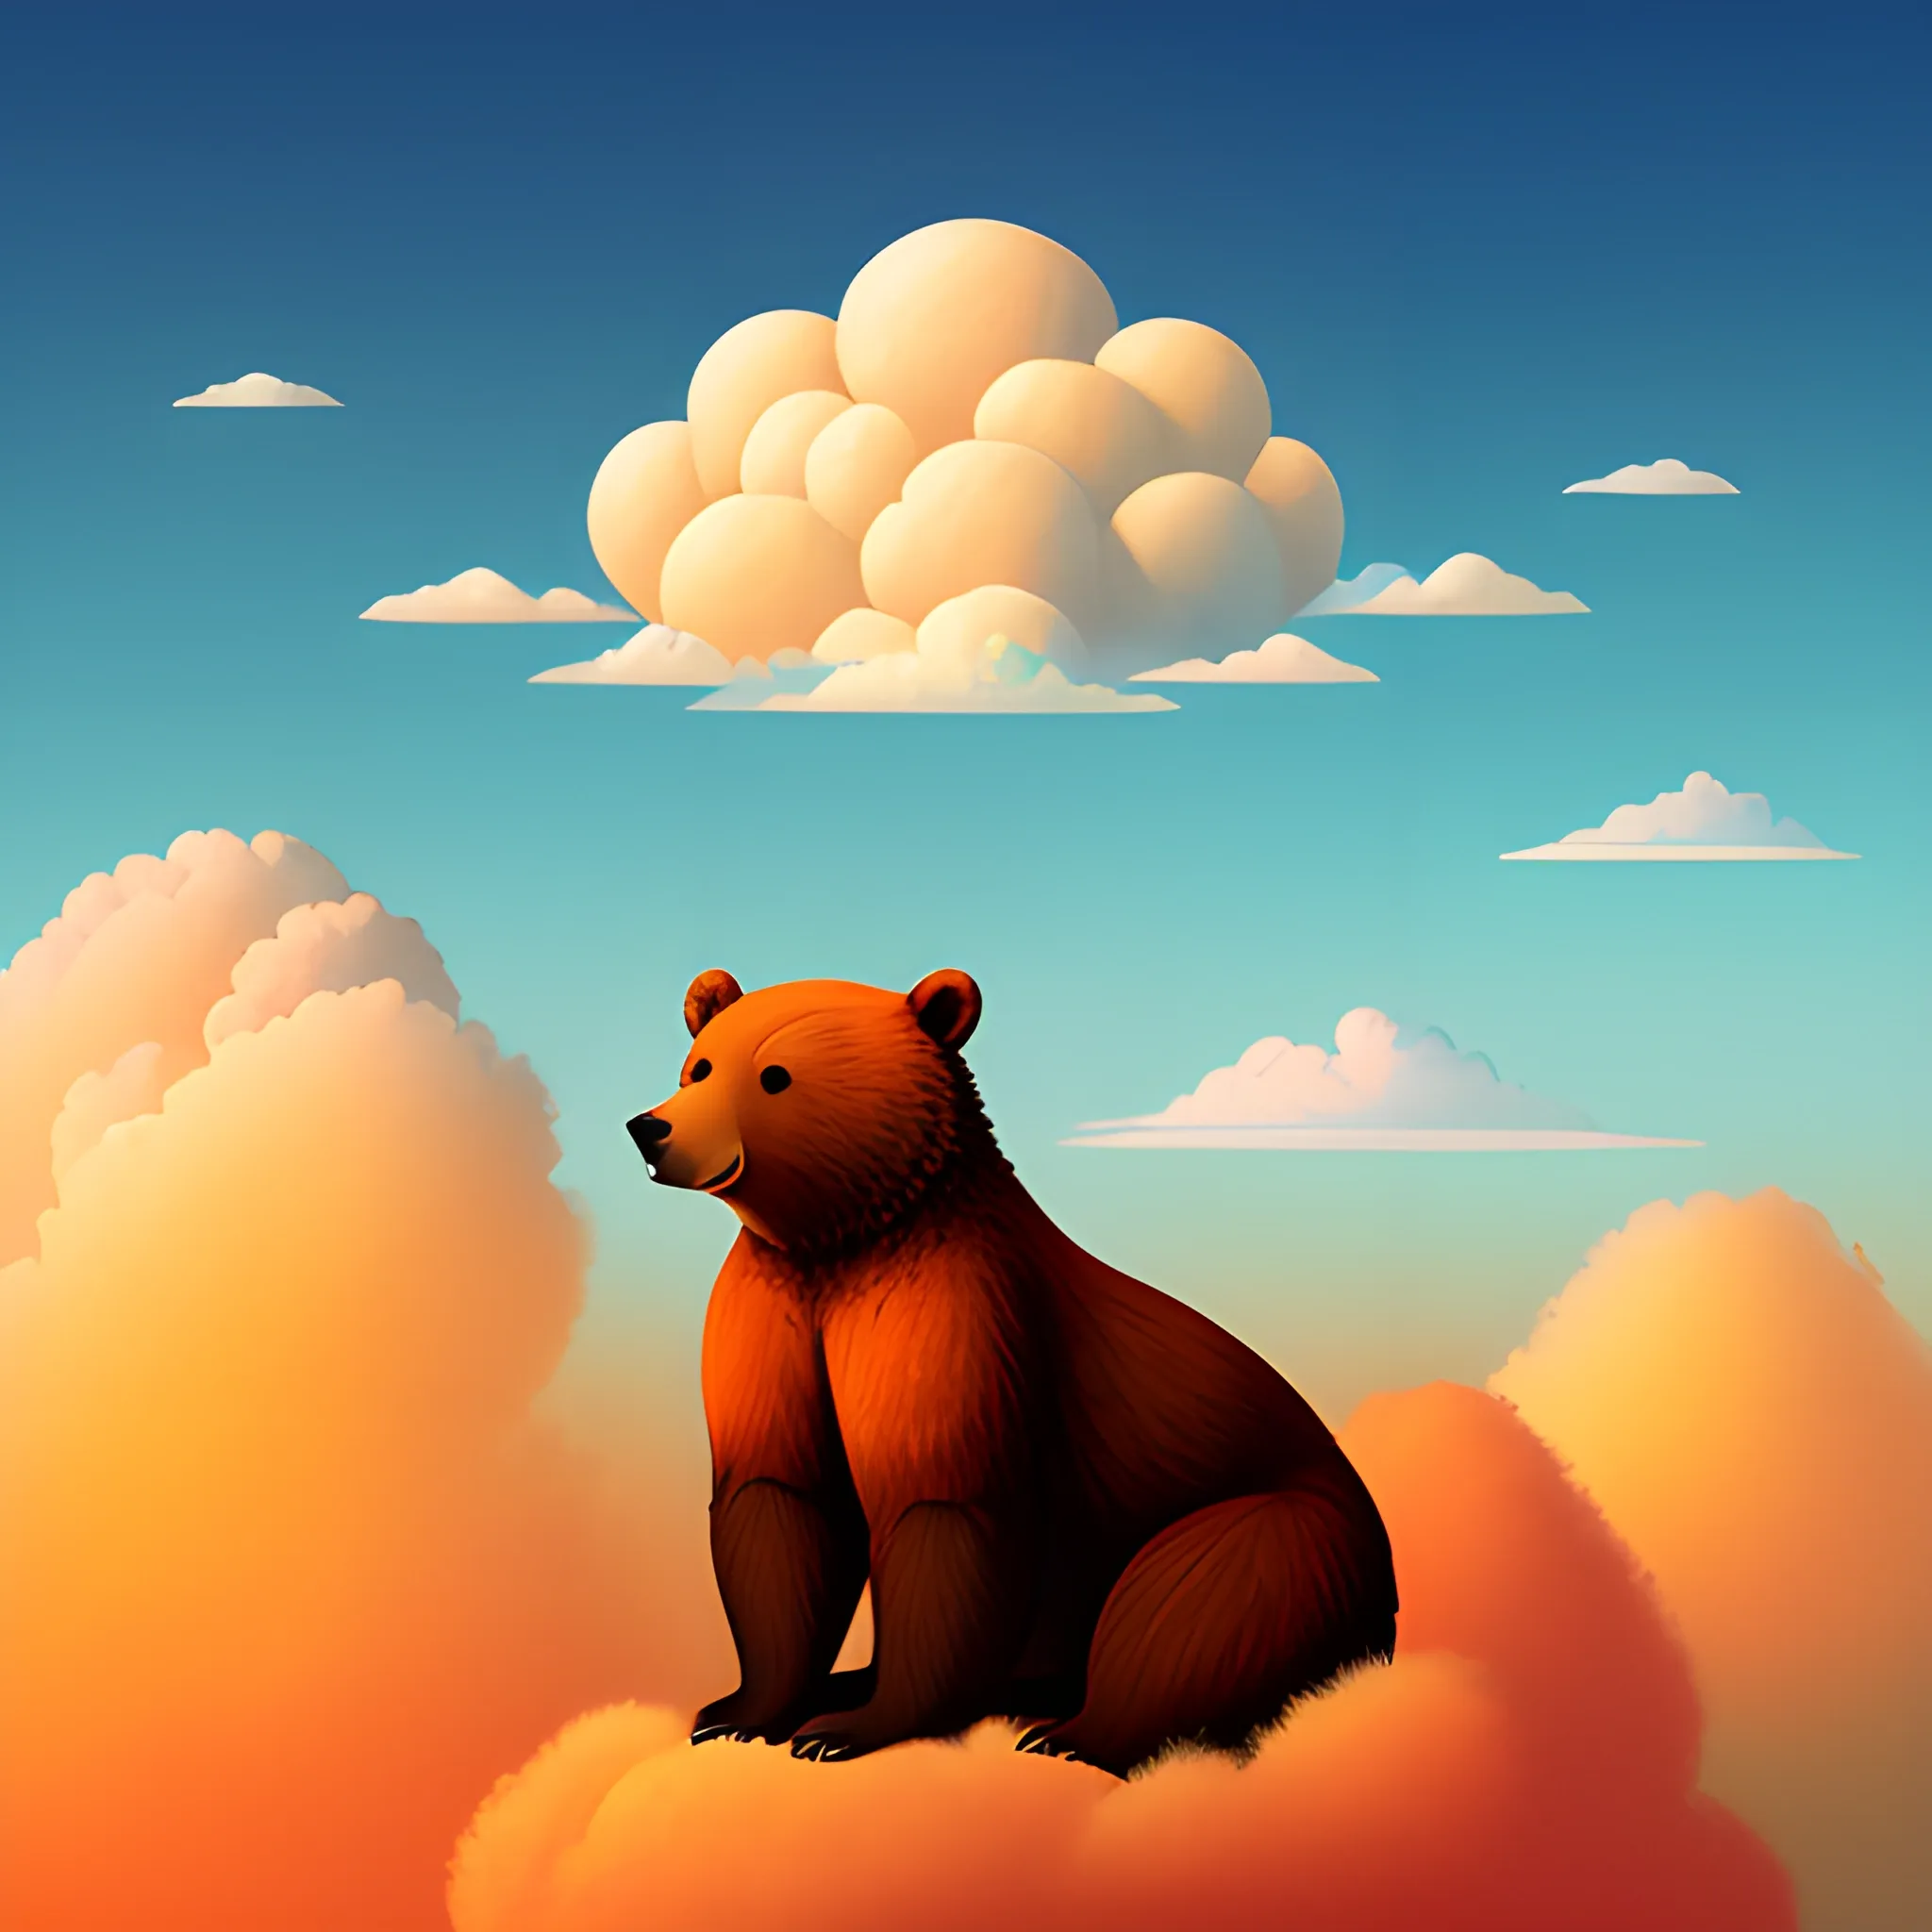 illustration of baby bear on a cloud over the skies and the landscape with daylight below, in digital painting style with warm colors